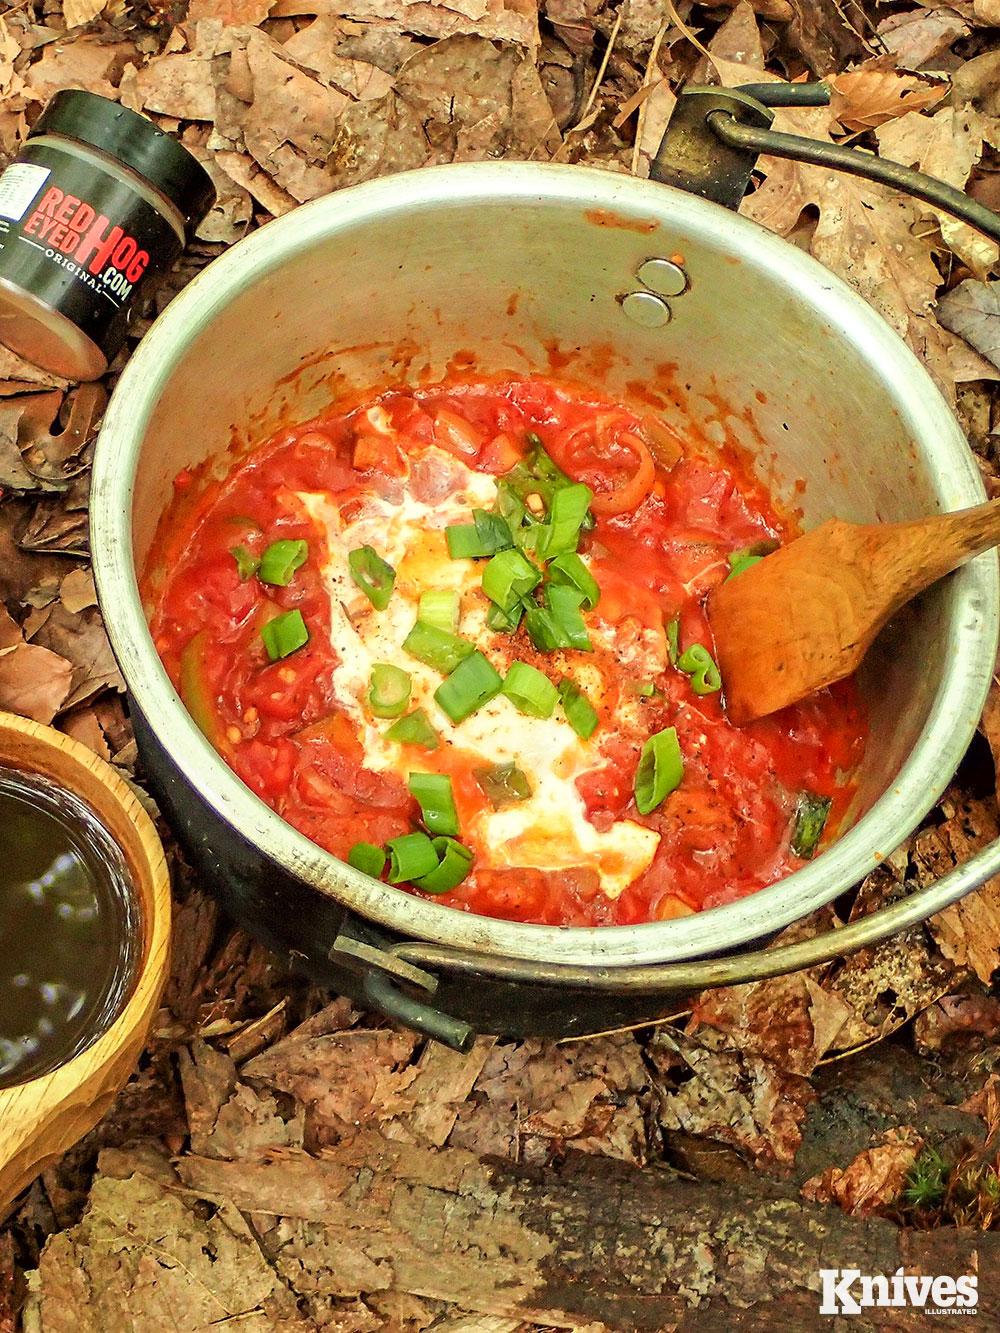 Camp Shakshuka made by the author in camp.